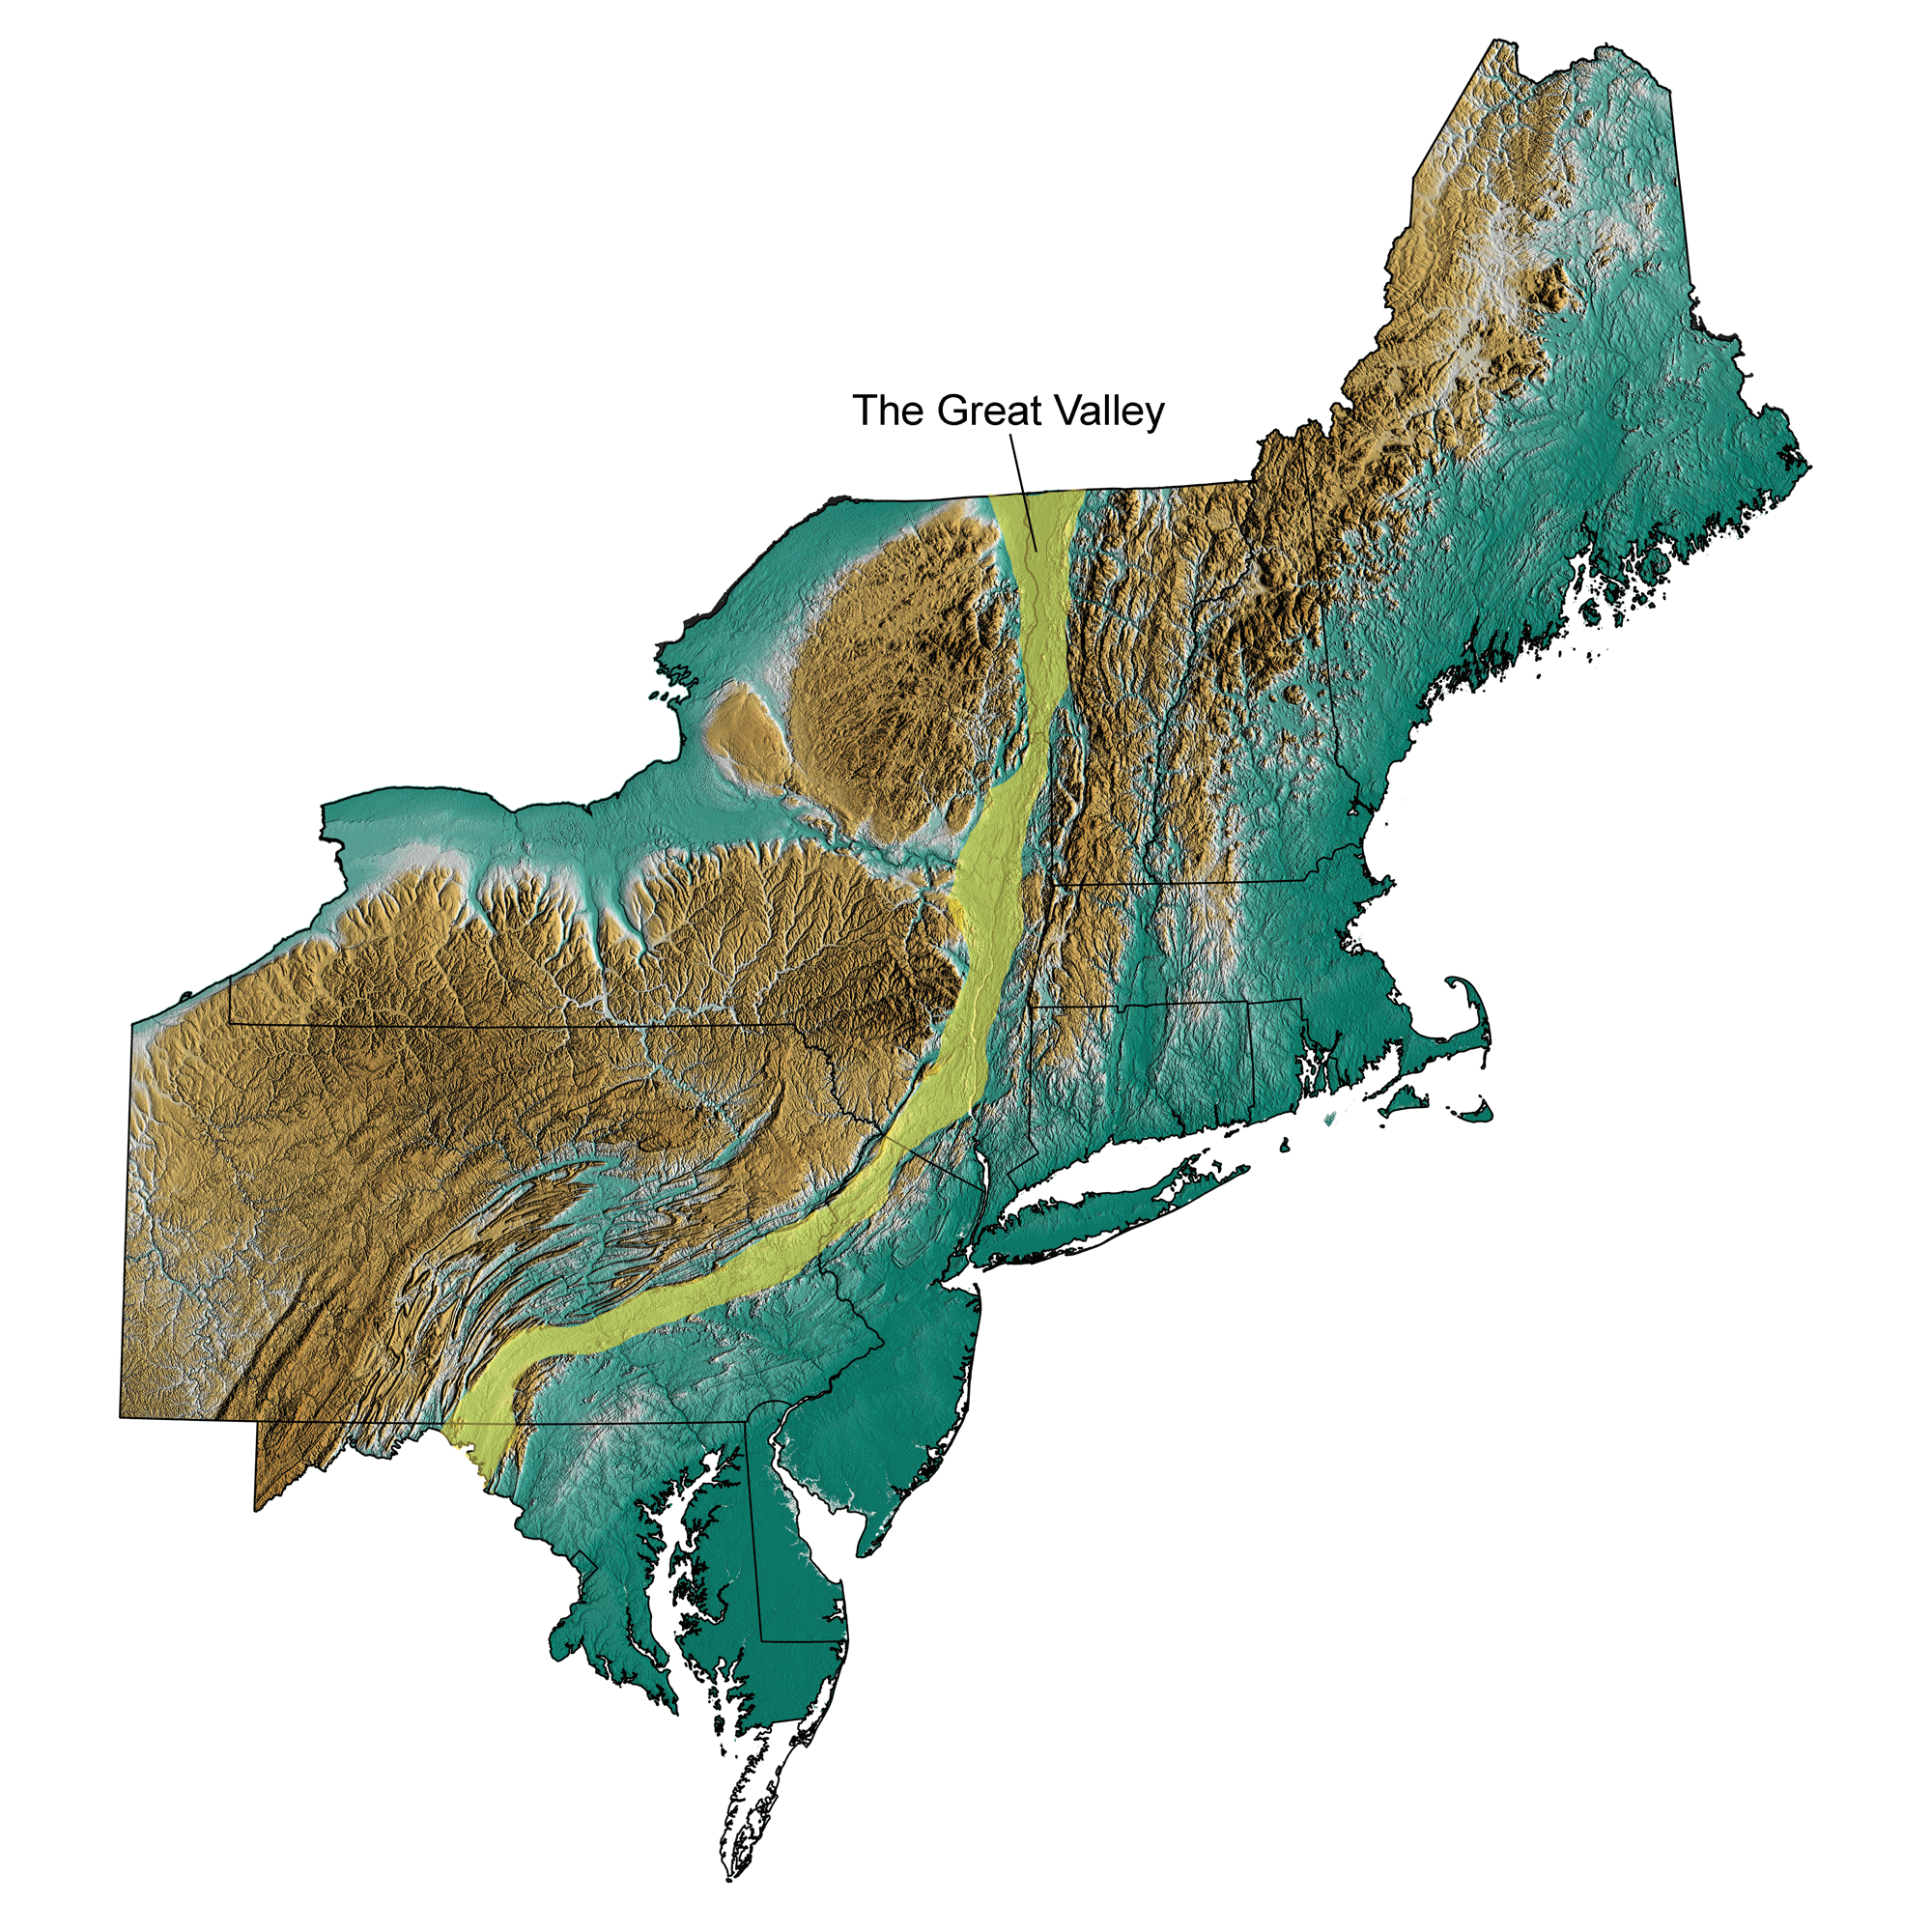 Topographic map of the northeastern United States showing the approximate position of The Great Valley.